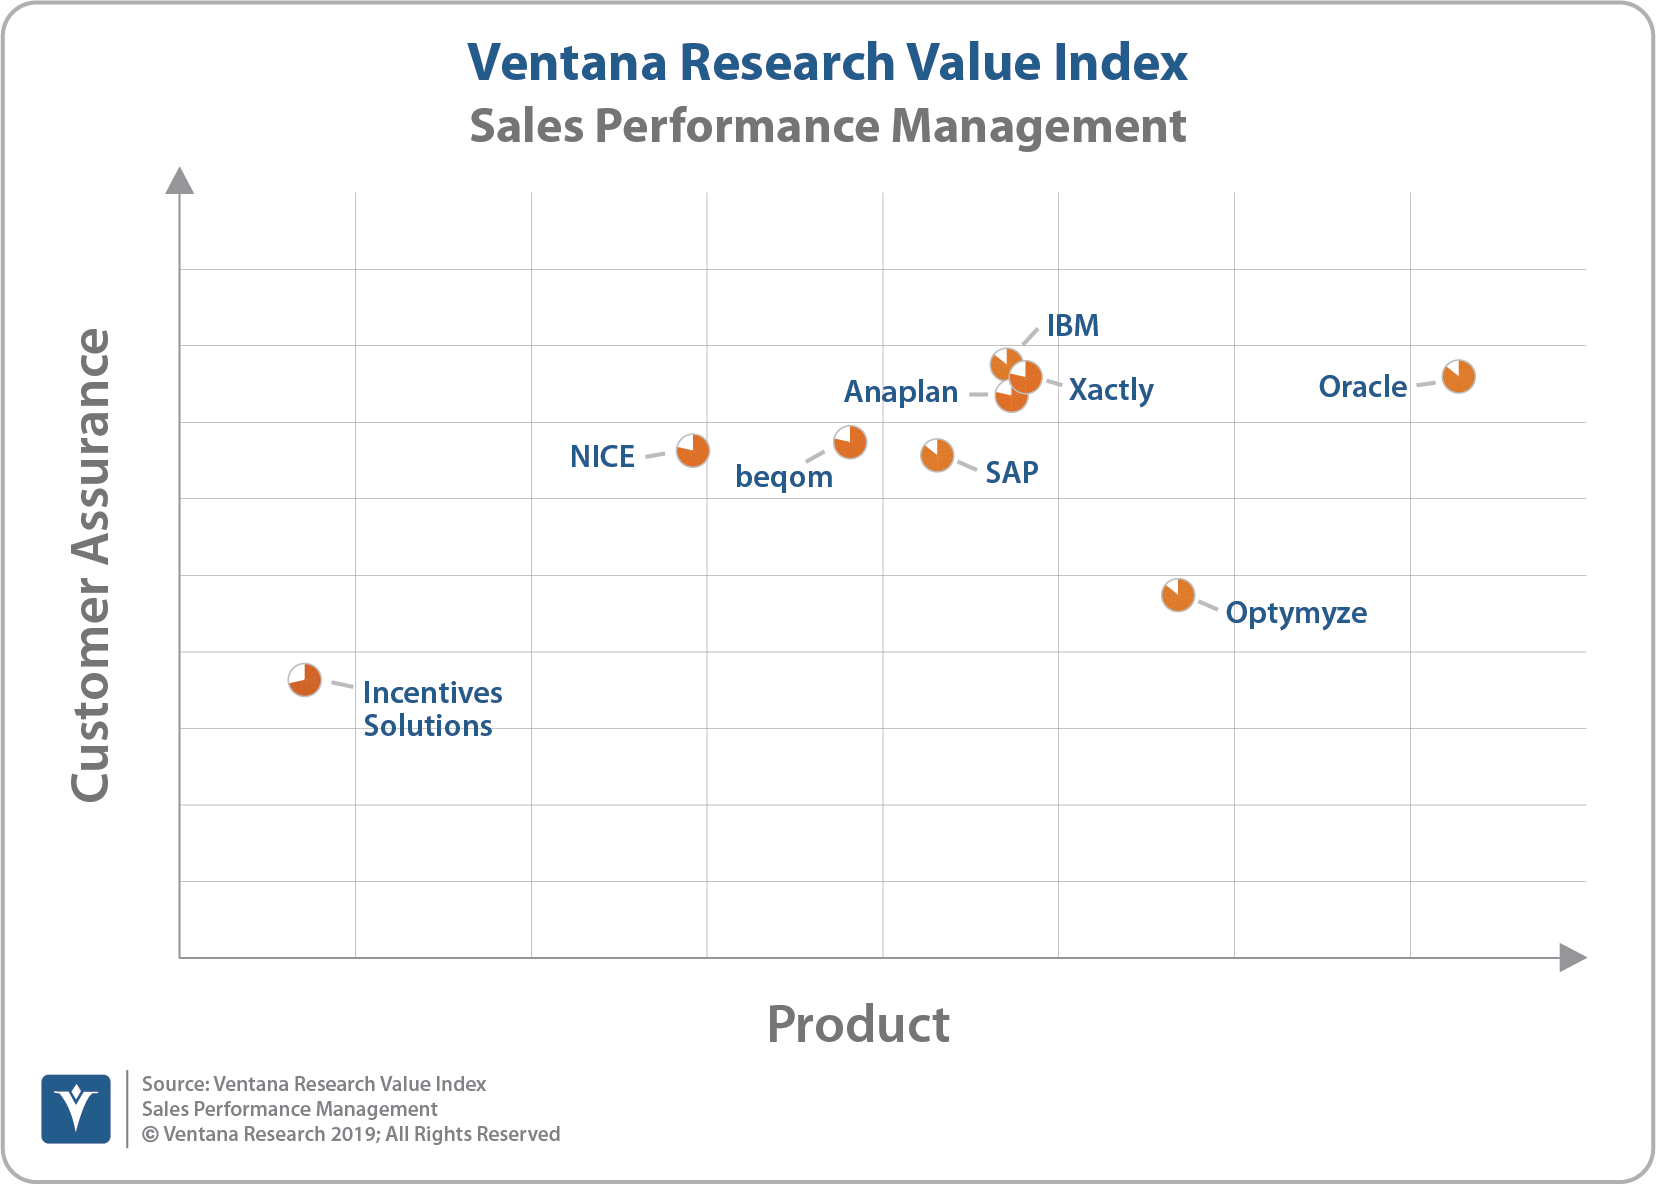 Ventana_Research_Value_Index_Sales_Performance_Management_2019_Scatter_190912